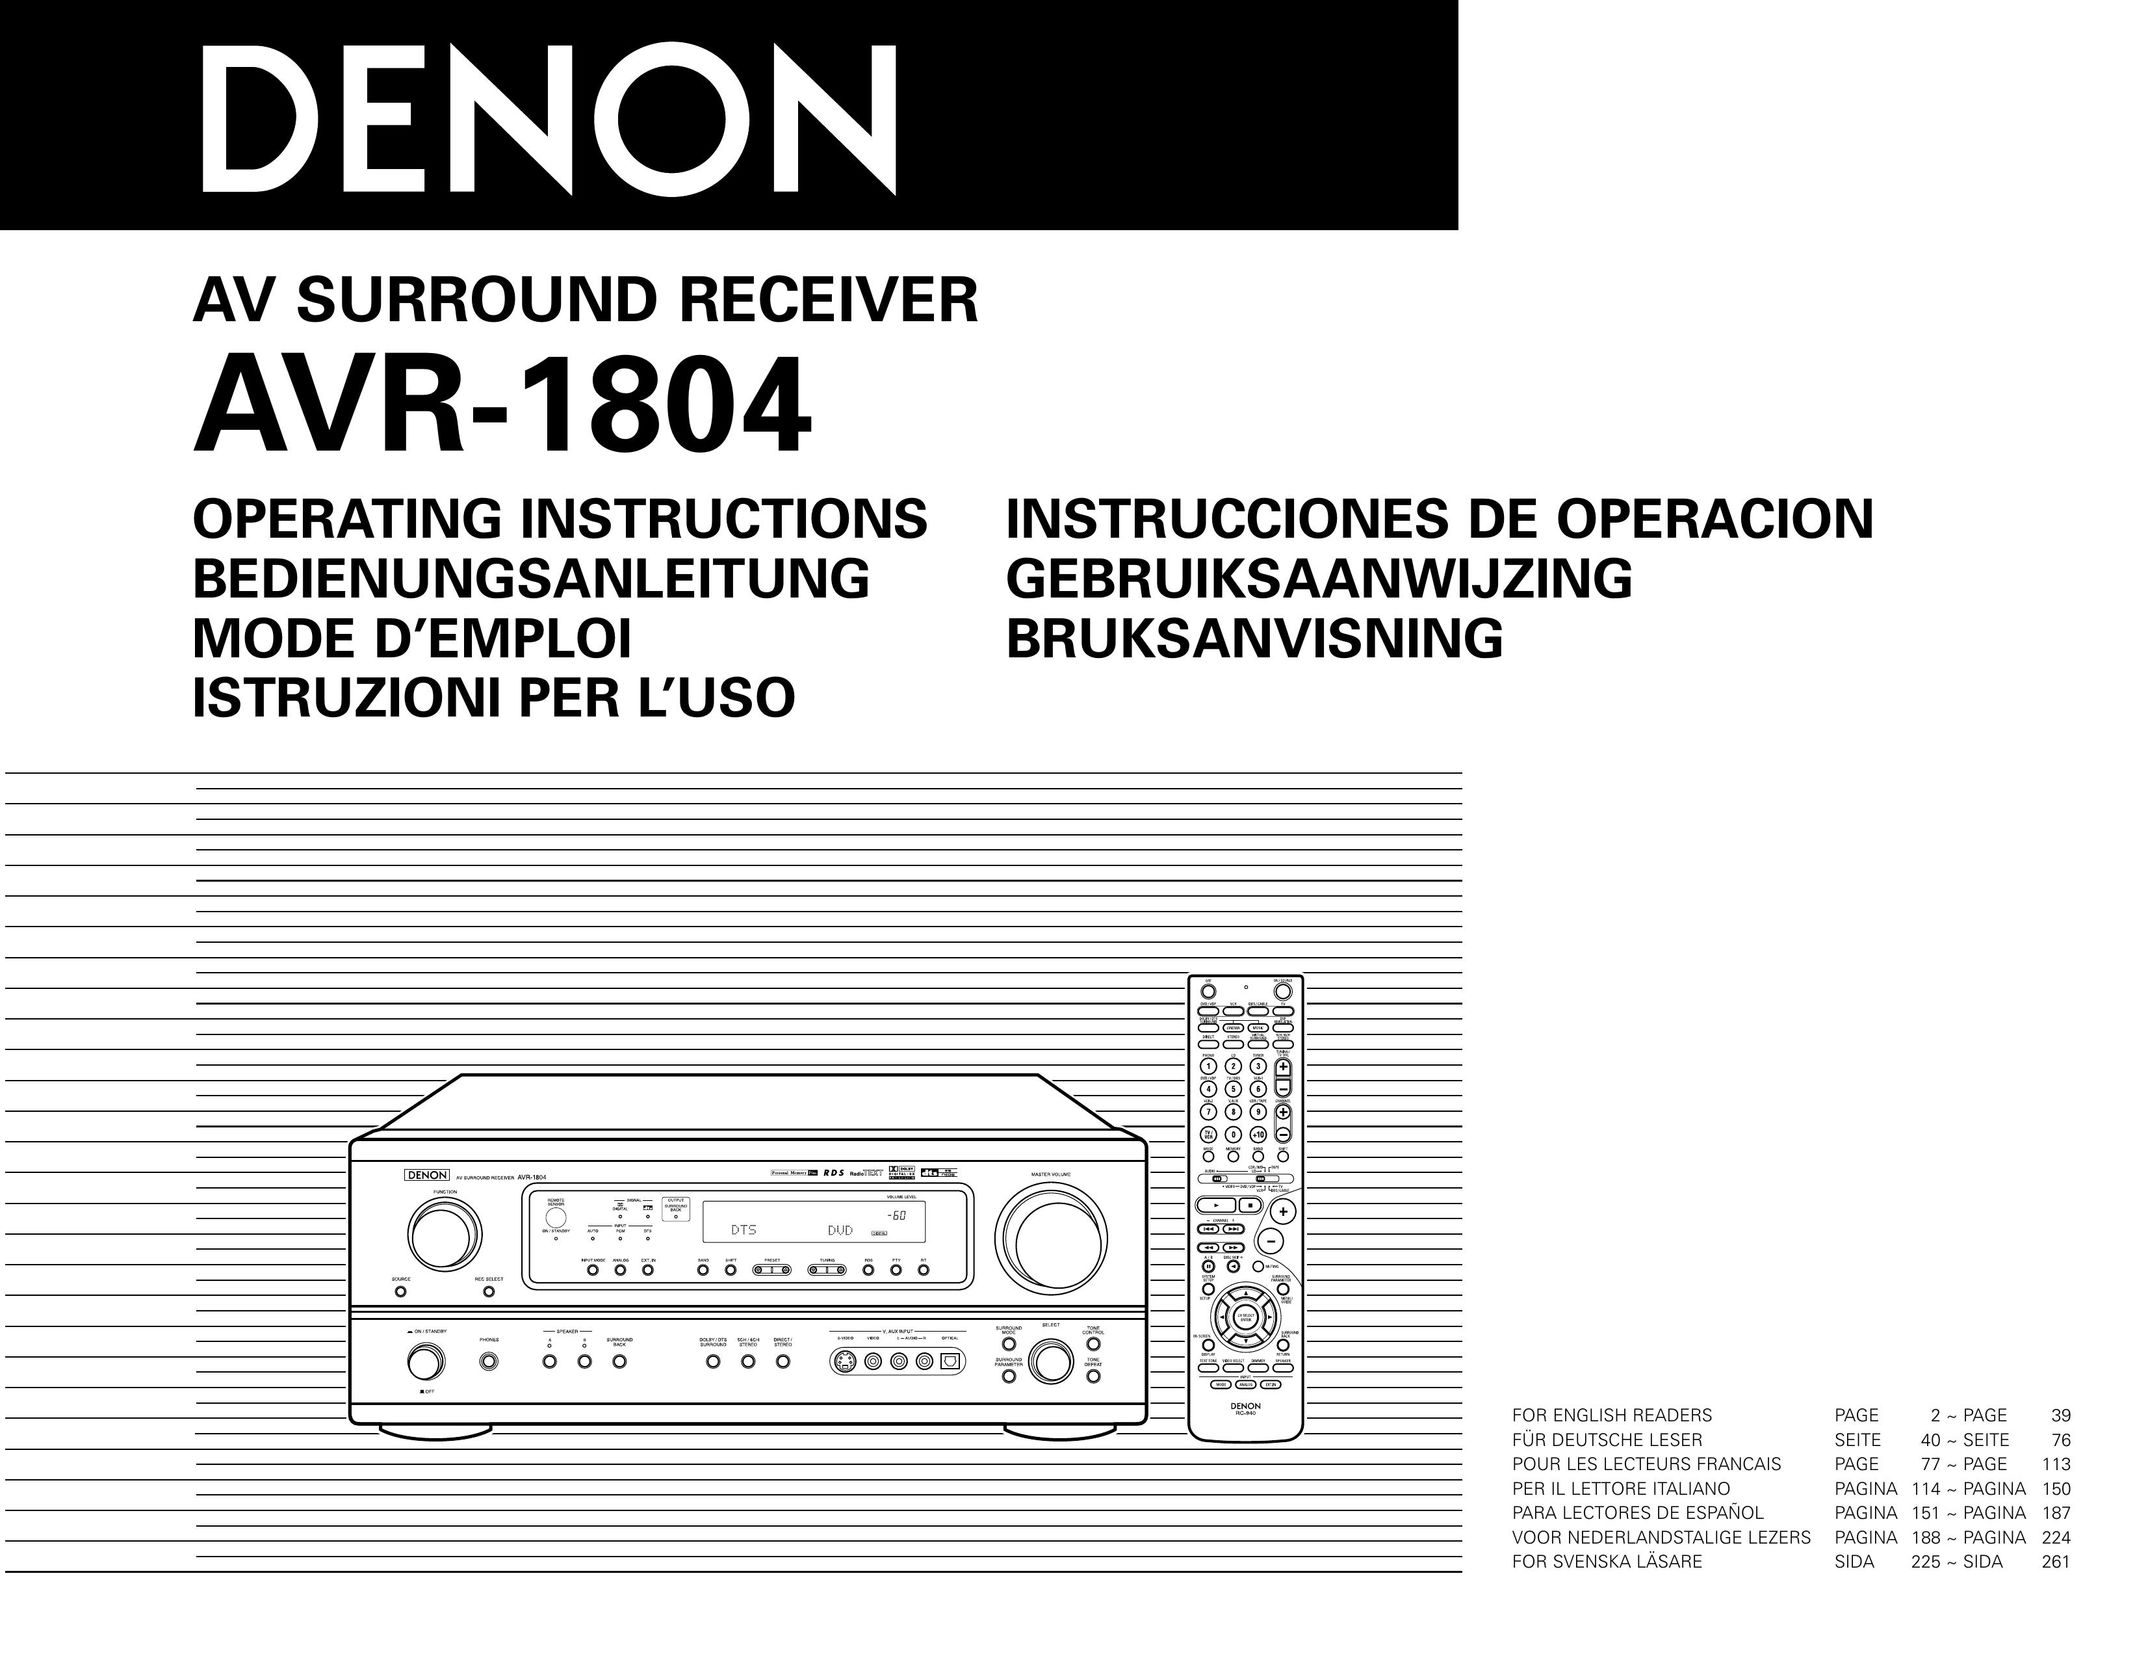 Denon AVR-1804 Home Theater System User Manual